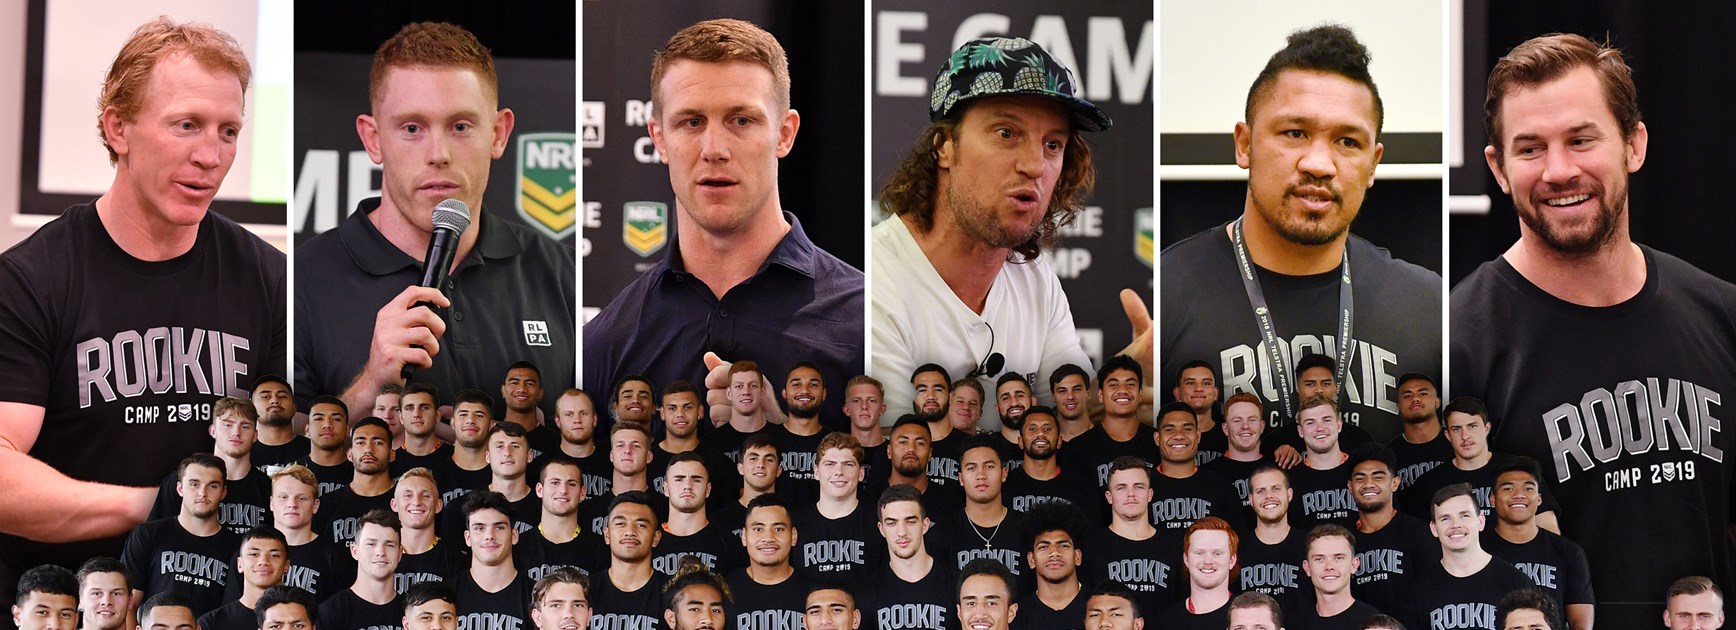 Timely lessons learned at 2018 NRL Rookie Camp